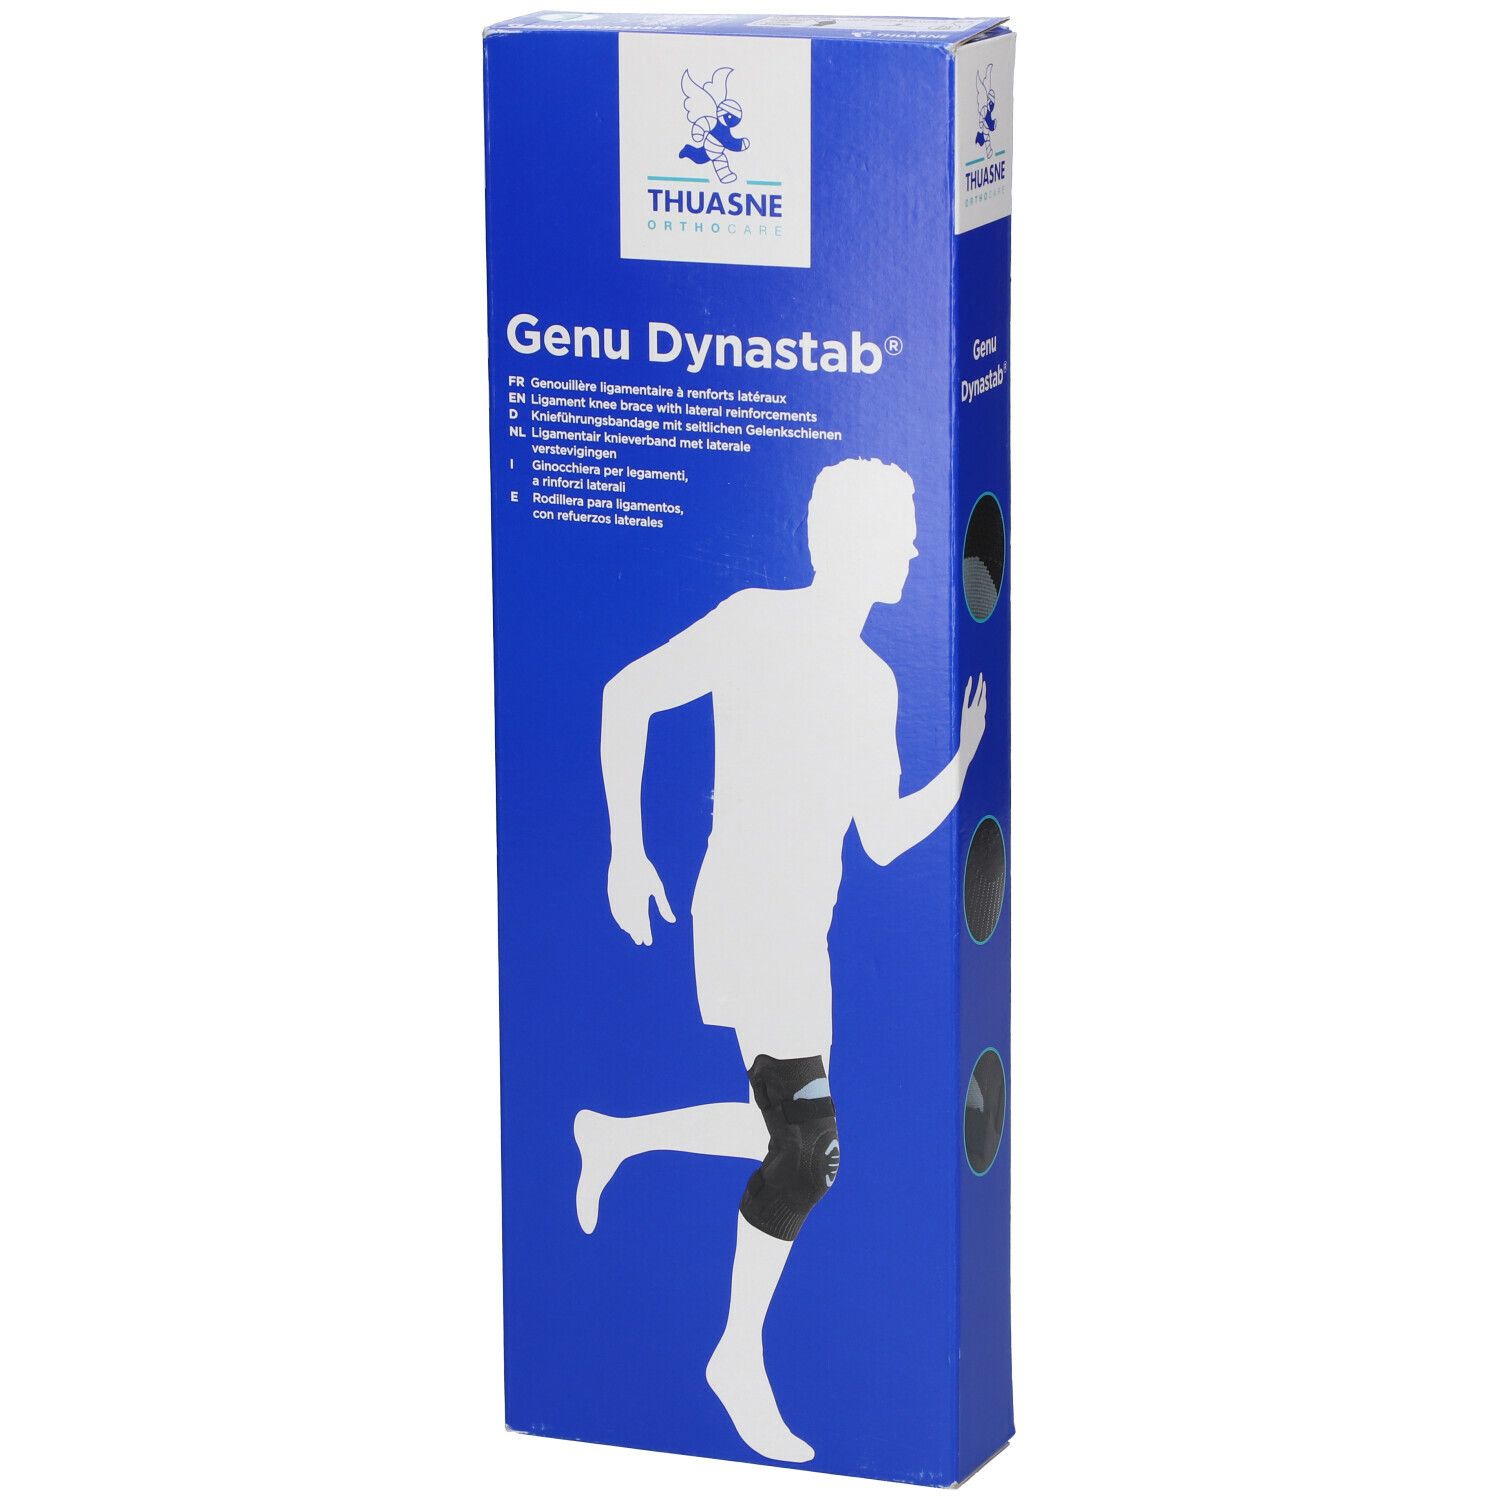 Thuasne Genu Dynastab® Genouillère Ligamentaire Taille 2